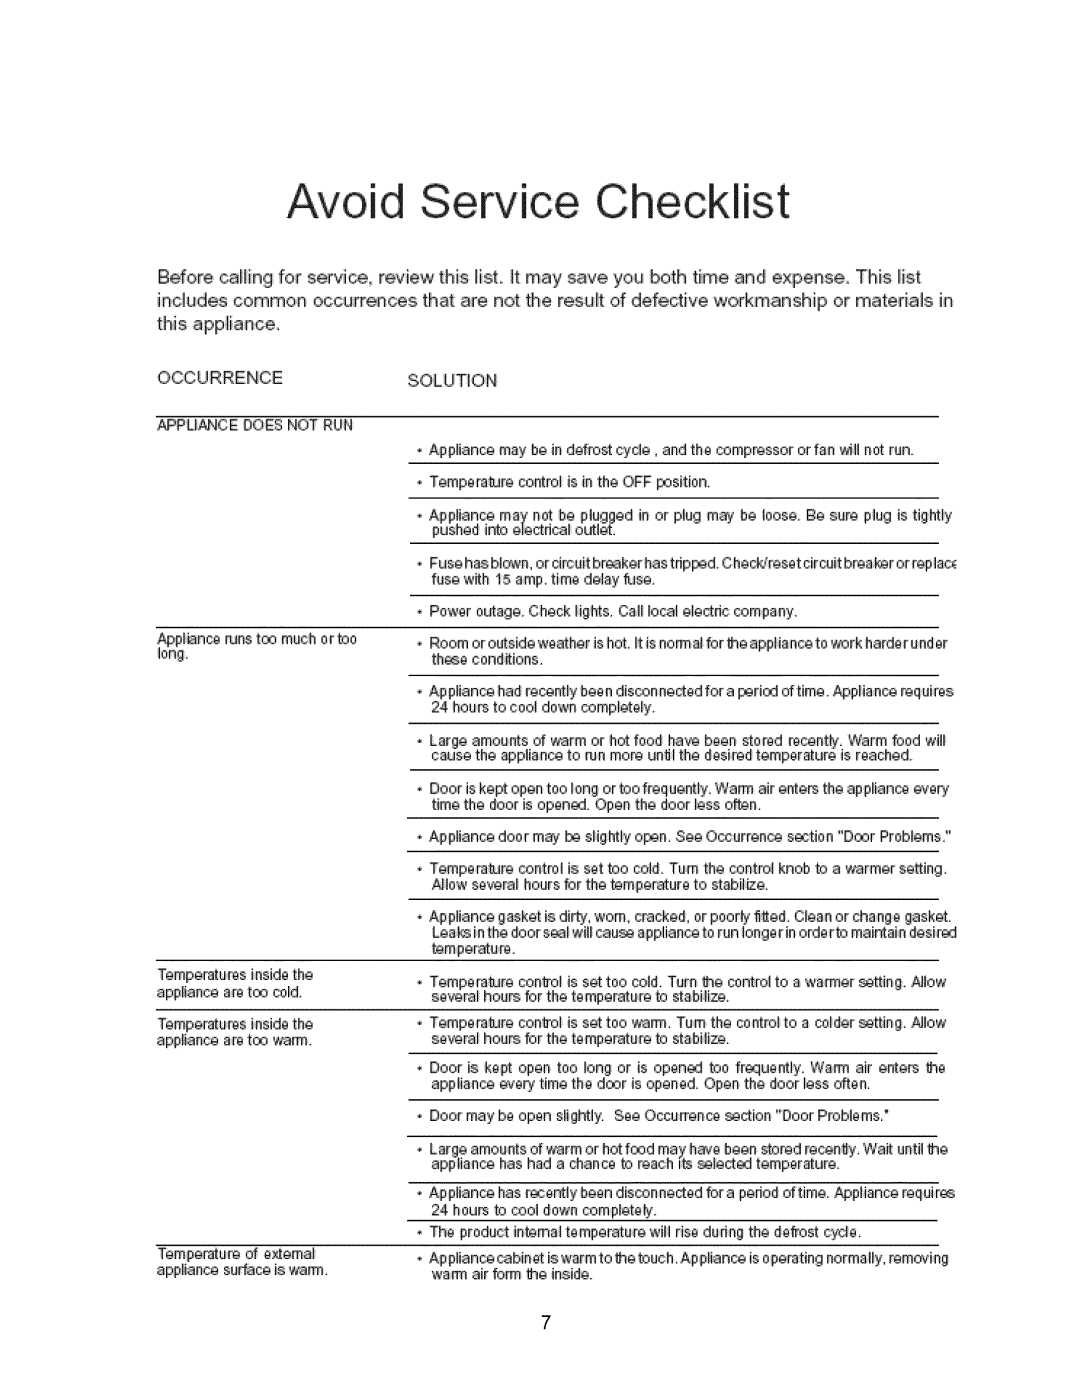 Arctic Air 297283501 important safety instructions Avoid Service Checklist, OOCURRENiCE, Solution 